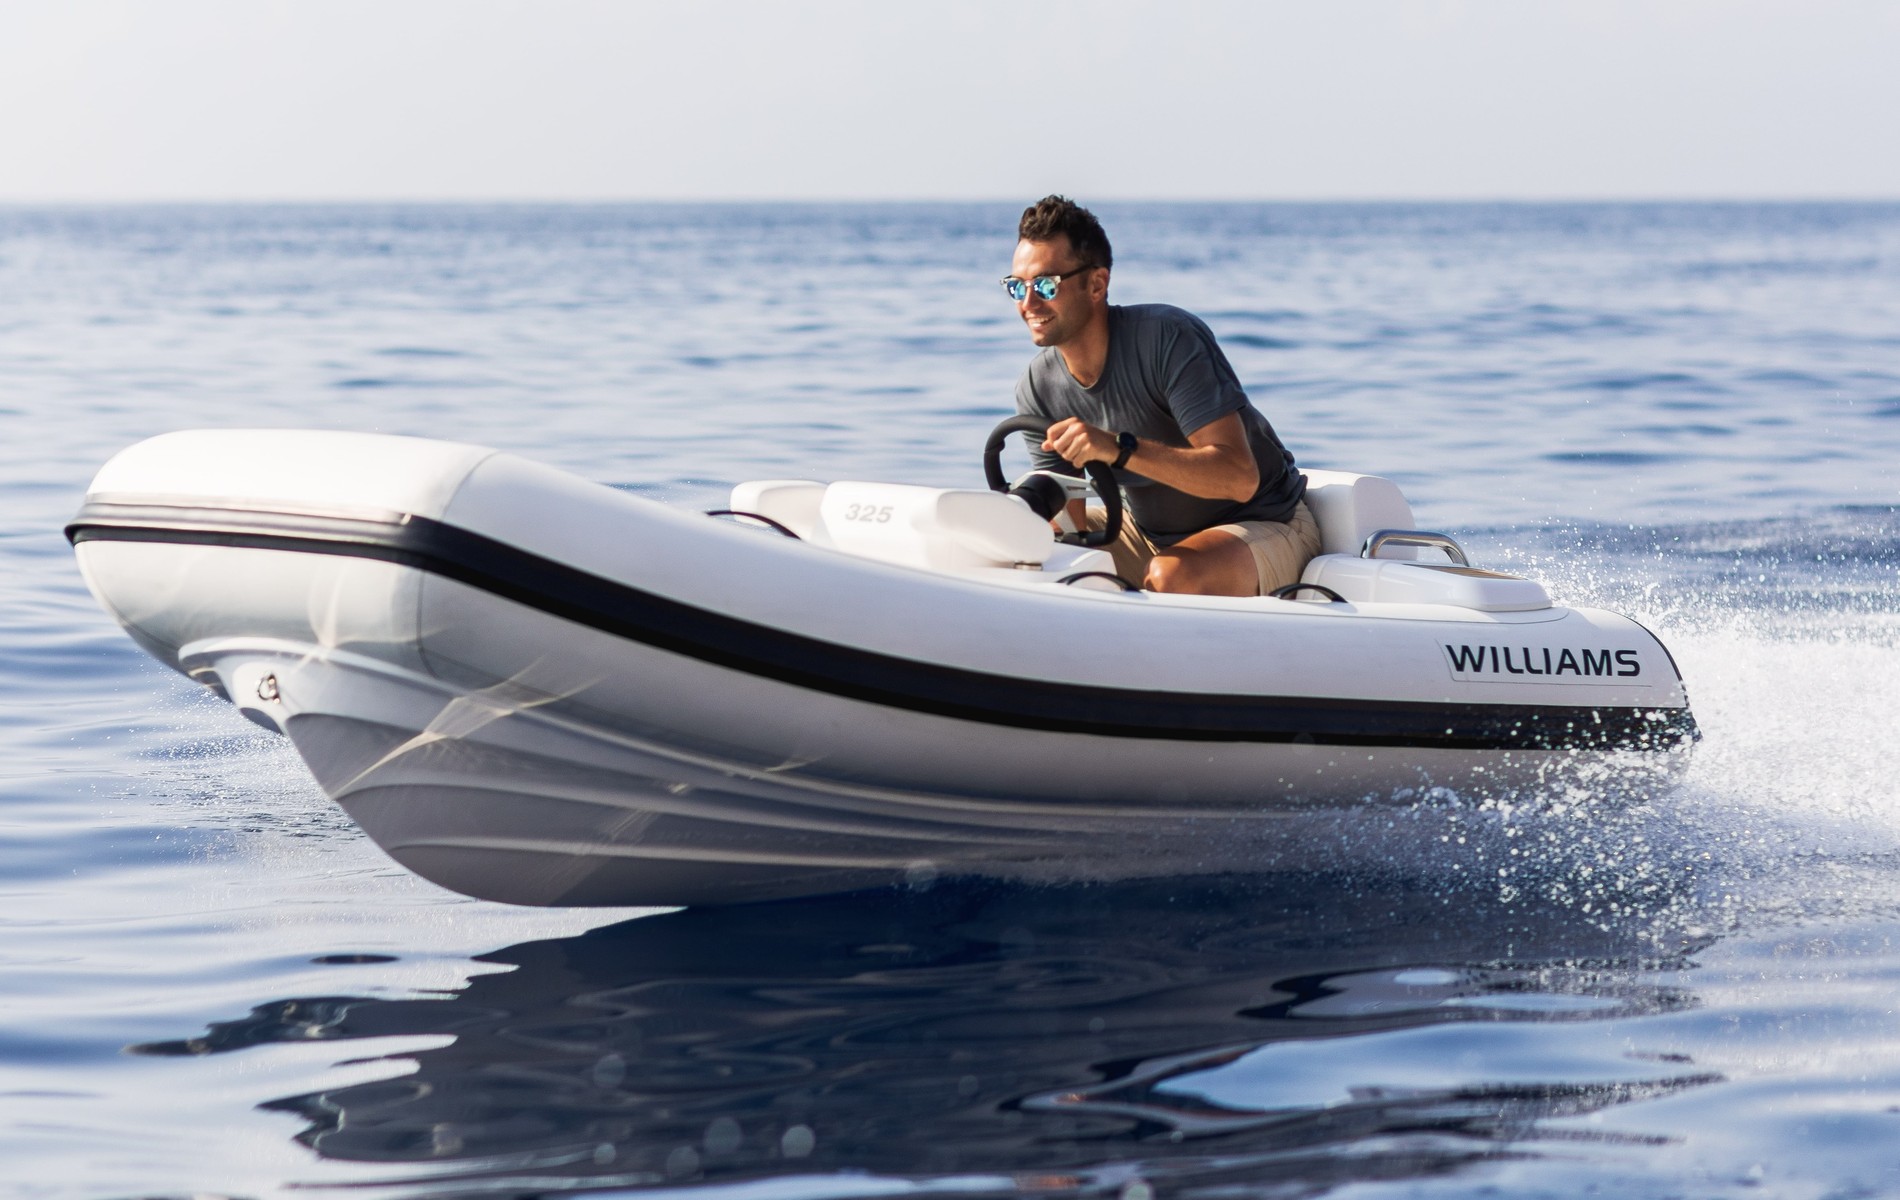 The 325 by Williams Jet Tenders